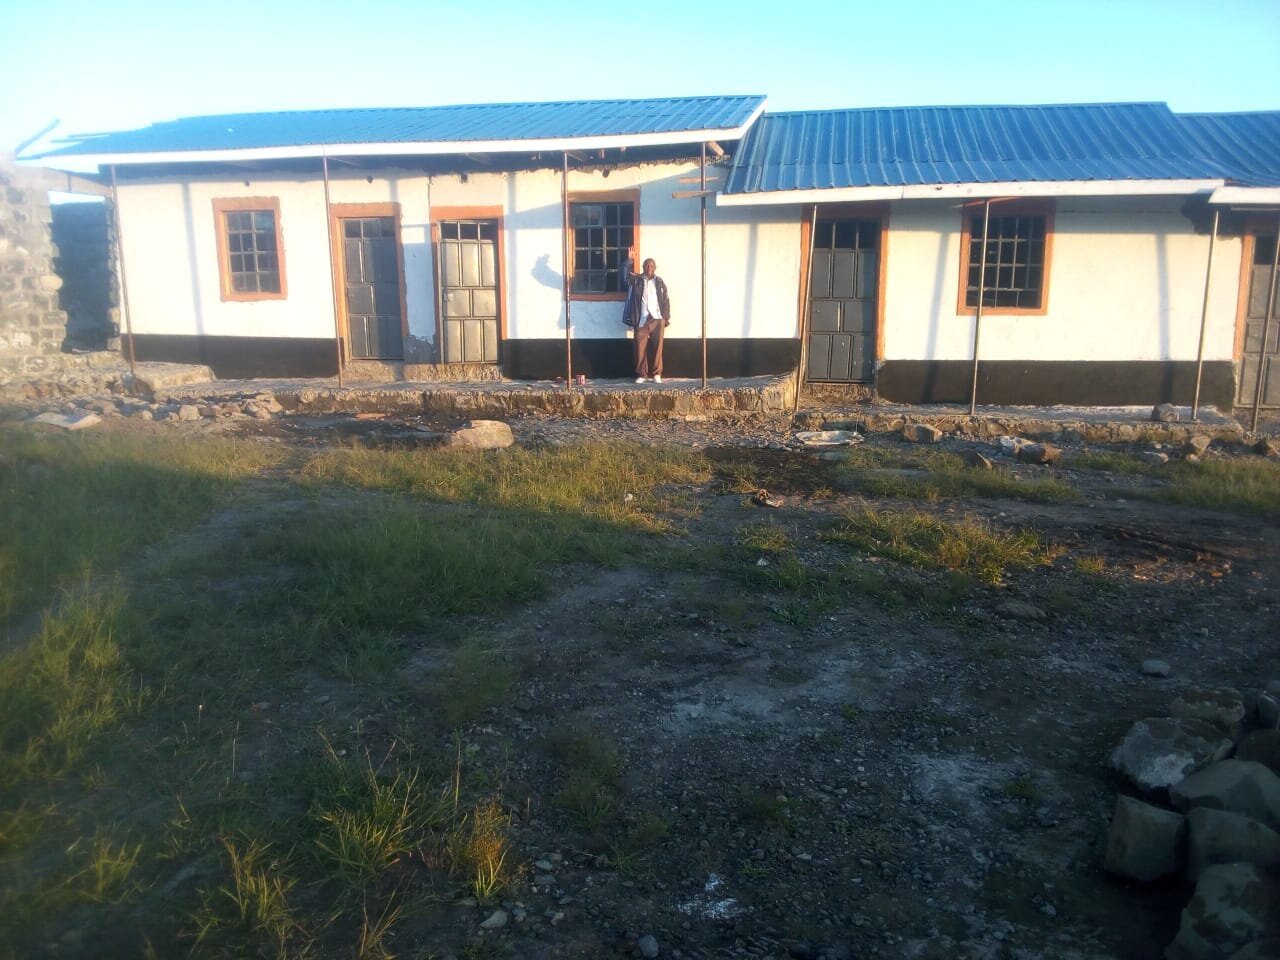 Peter in front of the new classrooms